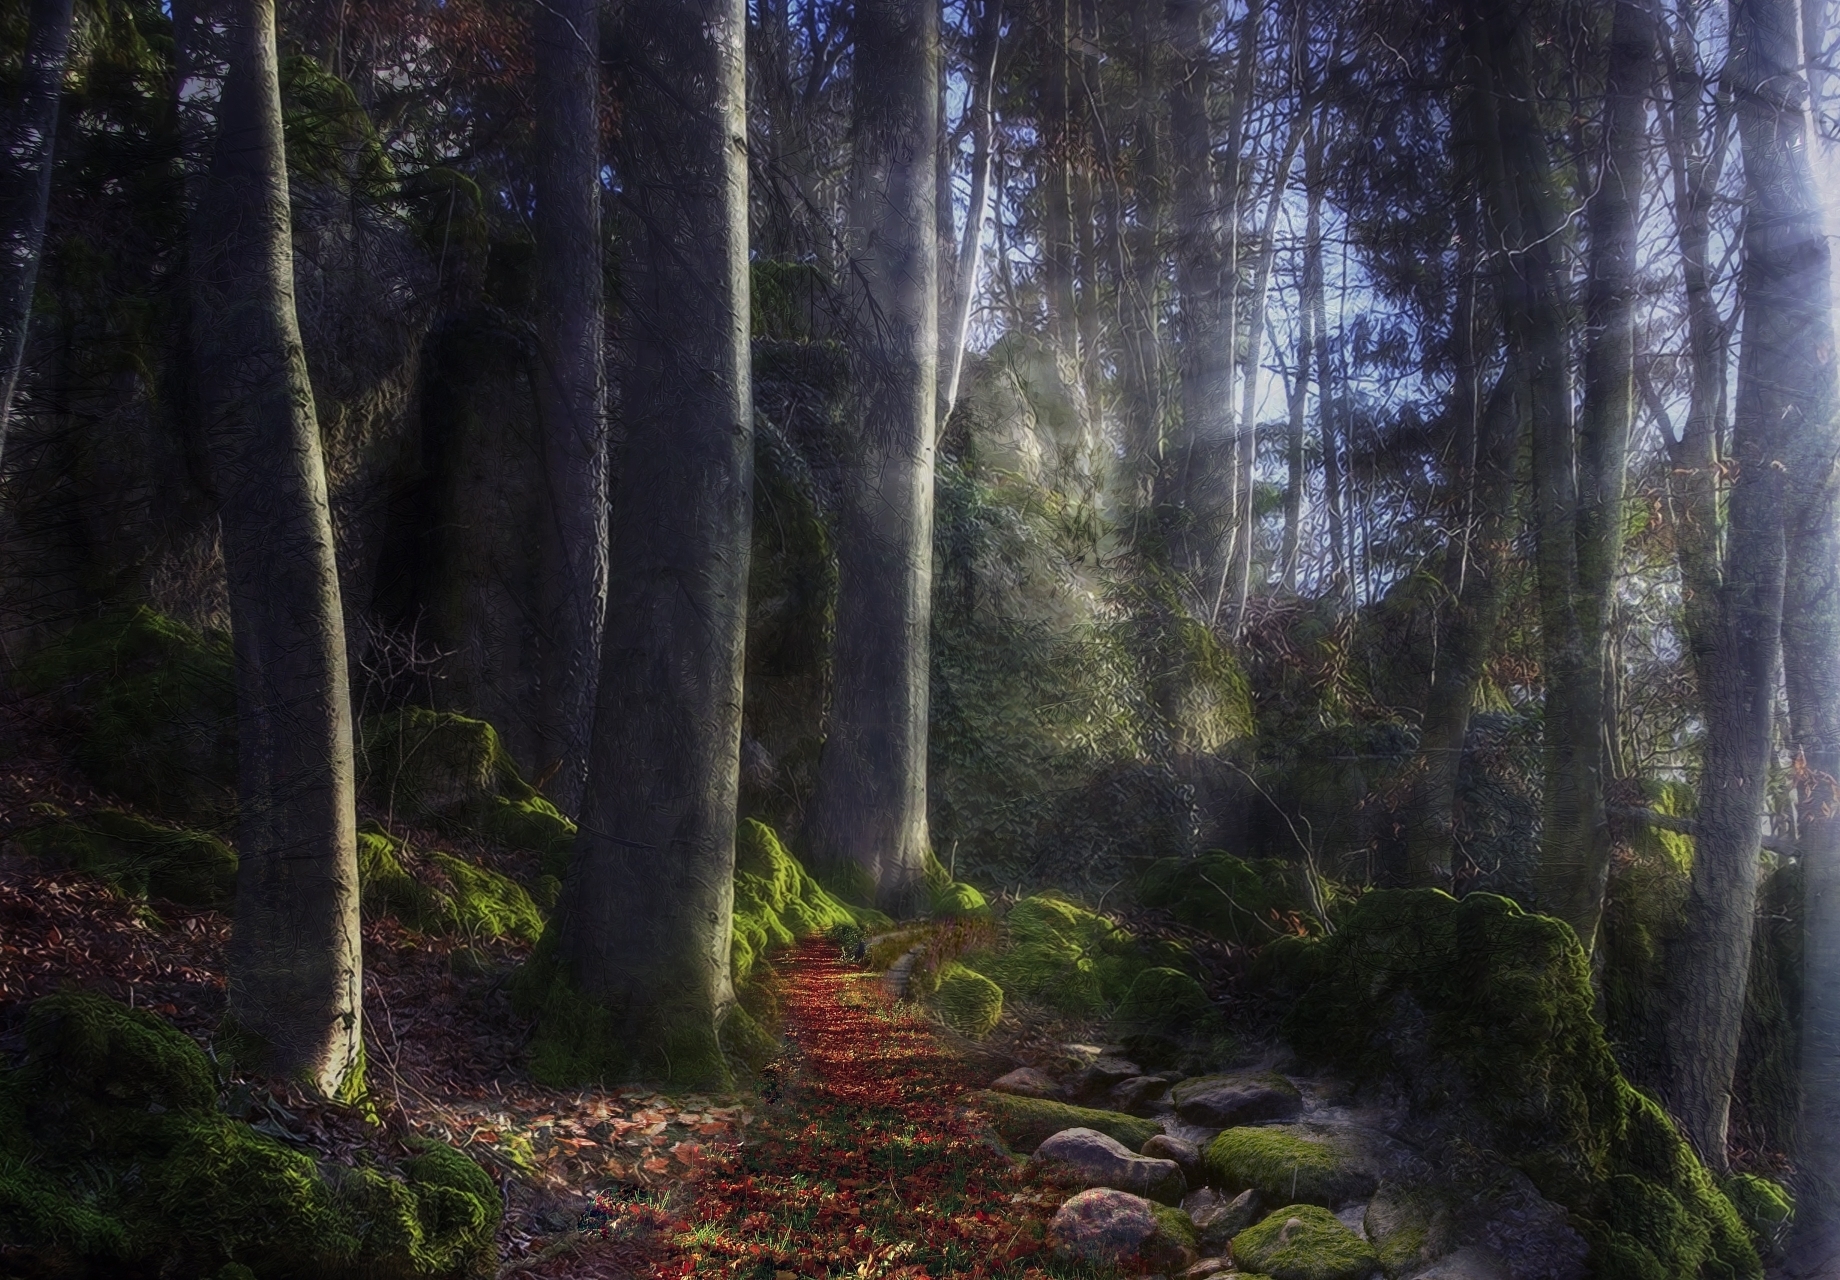 mysterious, shine, track, nature, stones, sun, light, beams, rays, forest, path, moss